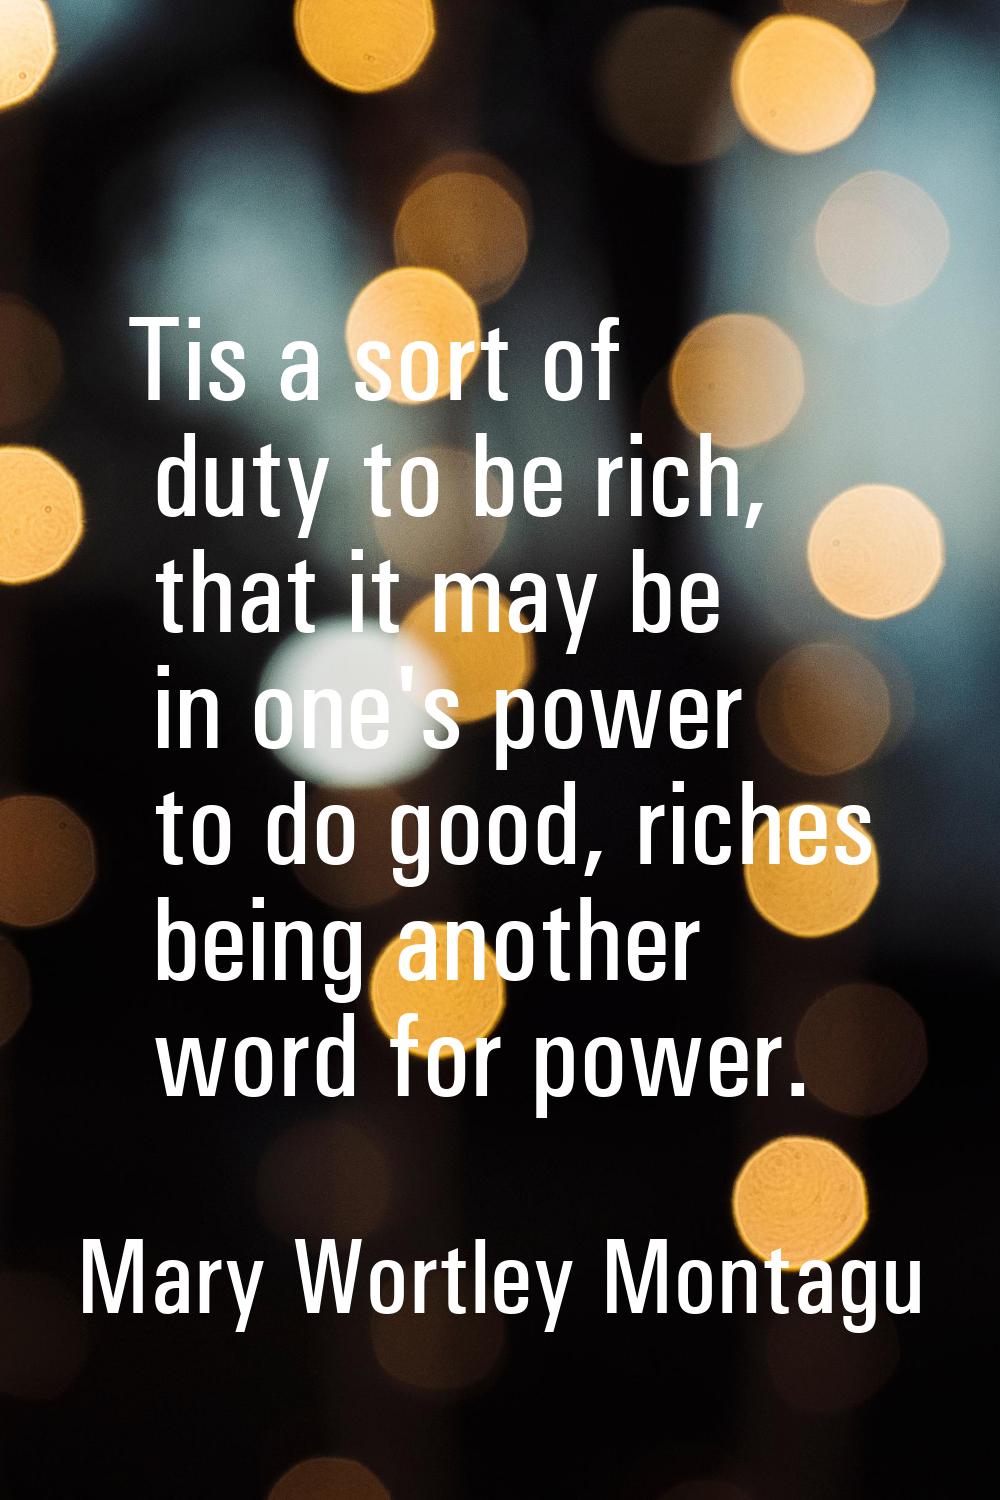 Tis a sort of duty to be rich, that it may be in one's power to do good, riches being another word 